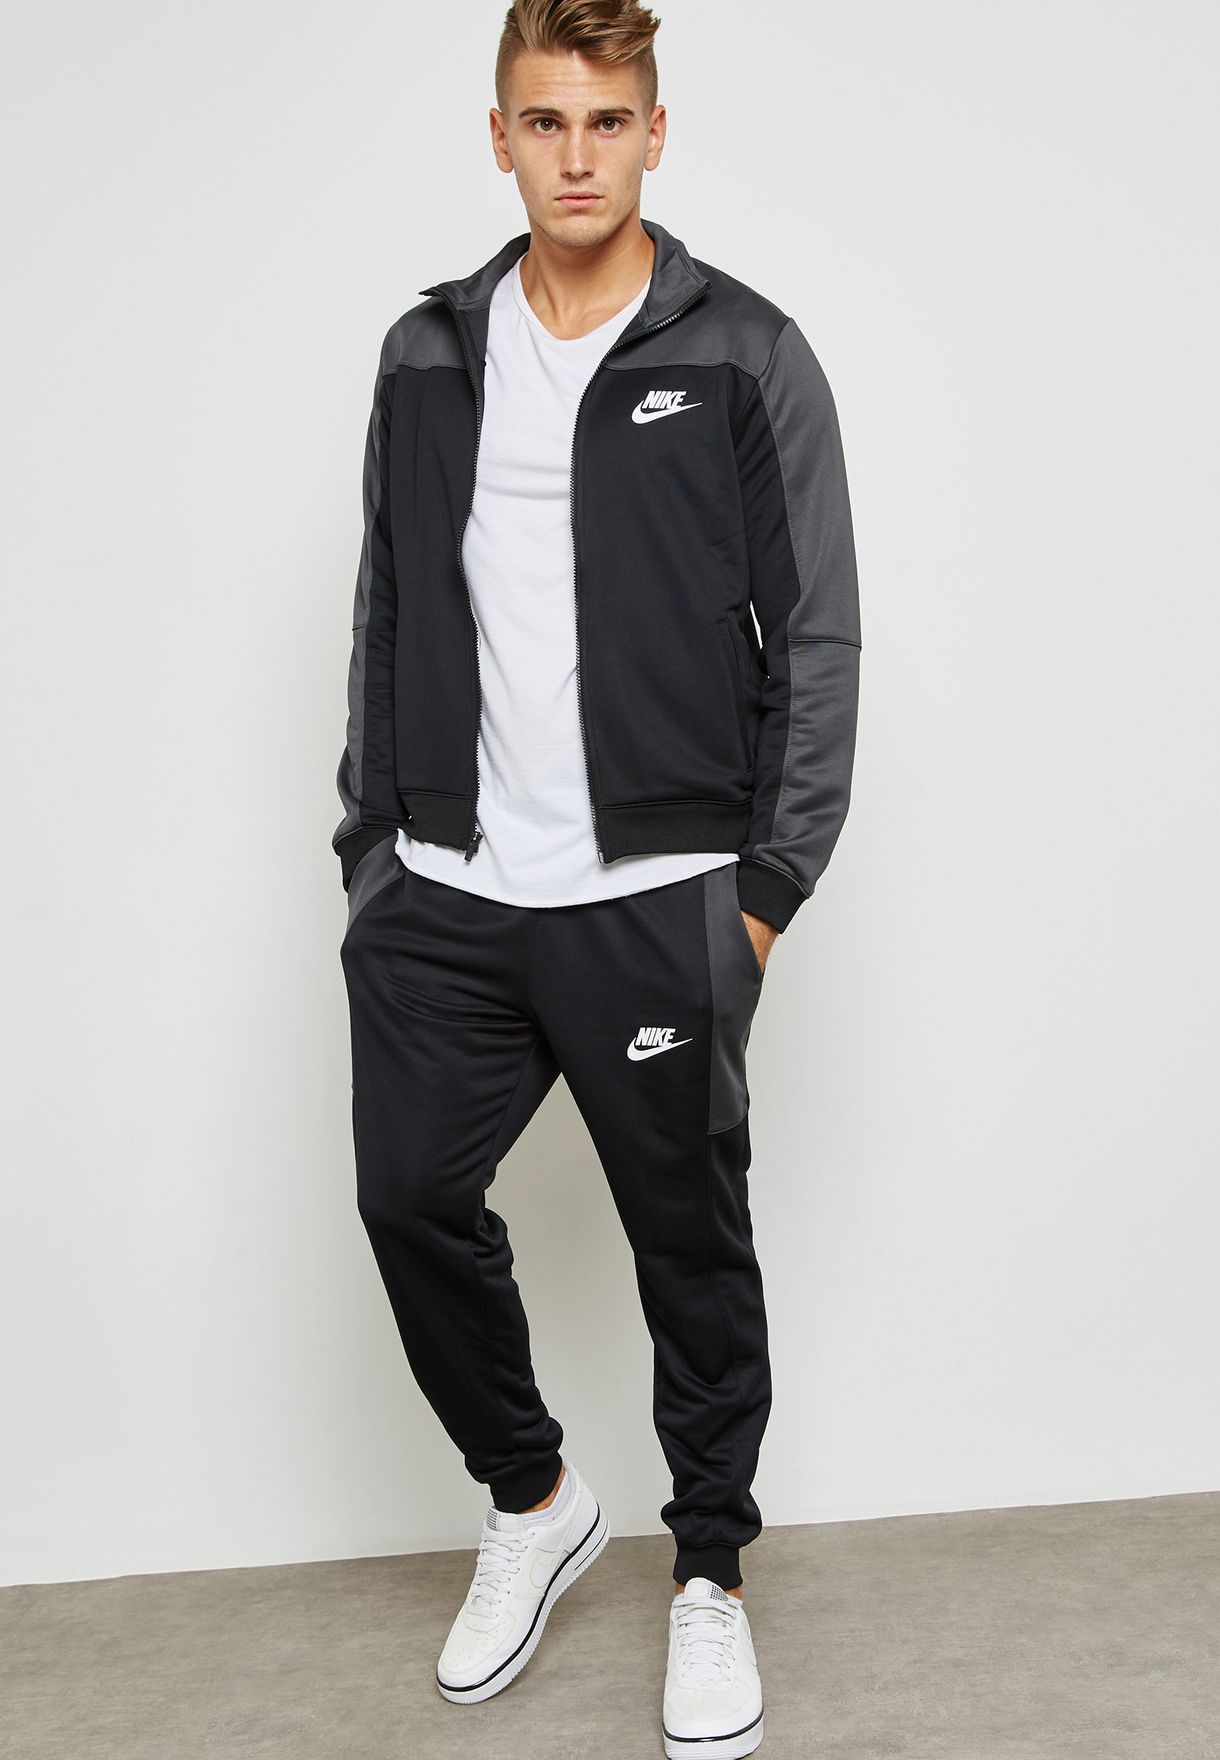 Buy Nike multicolor Logo Tracksuit for 